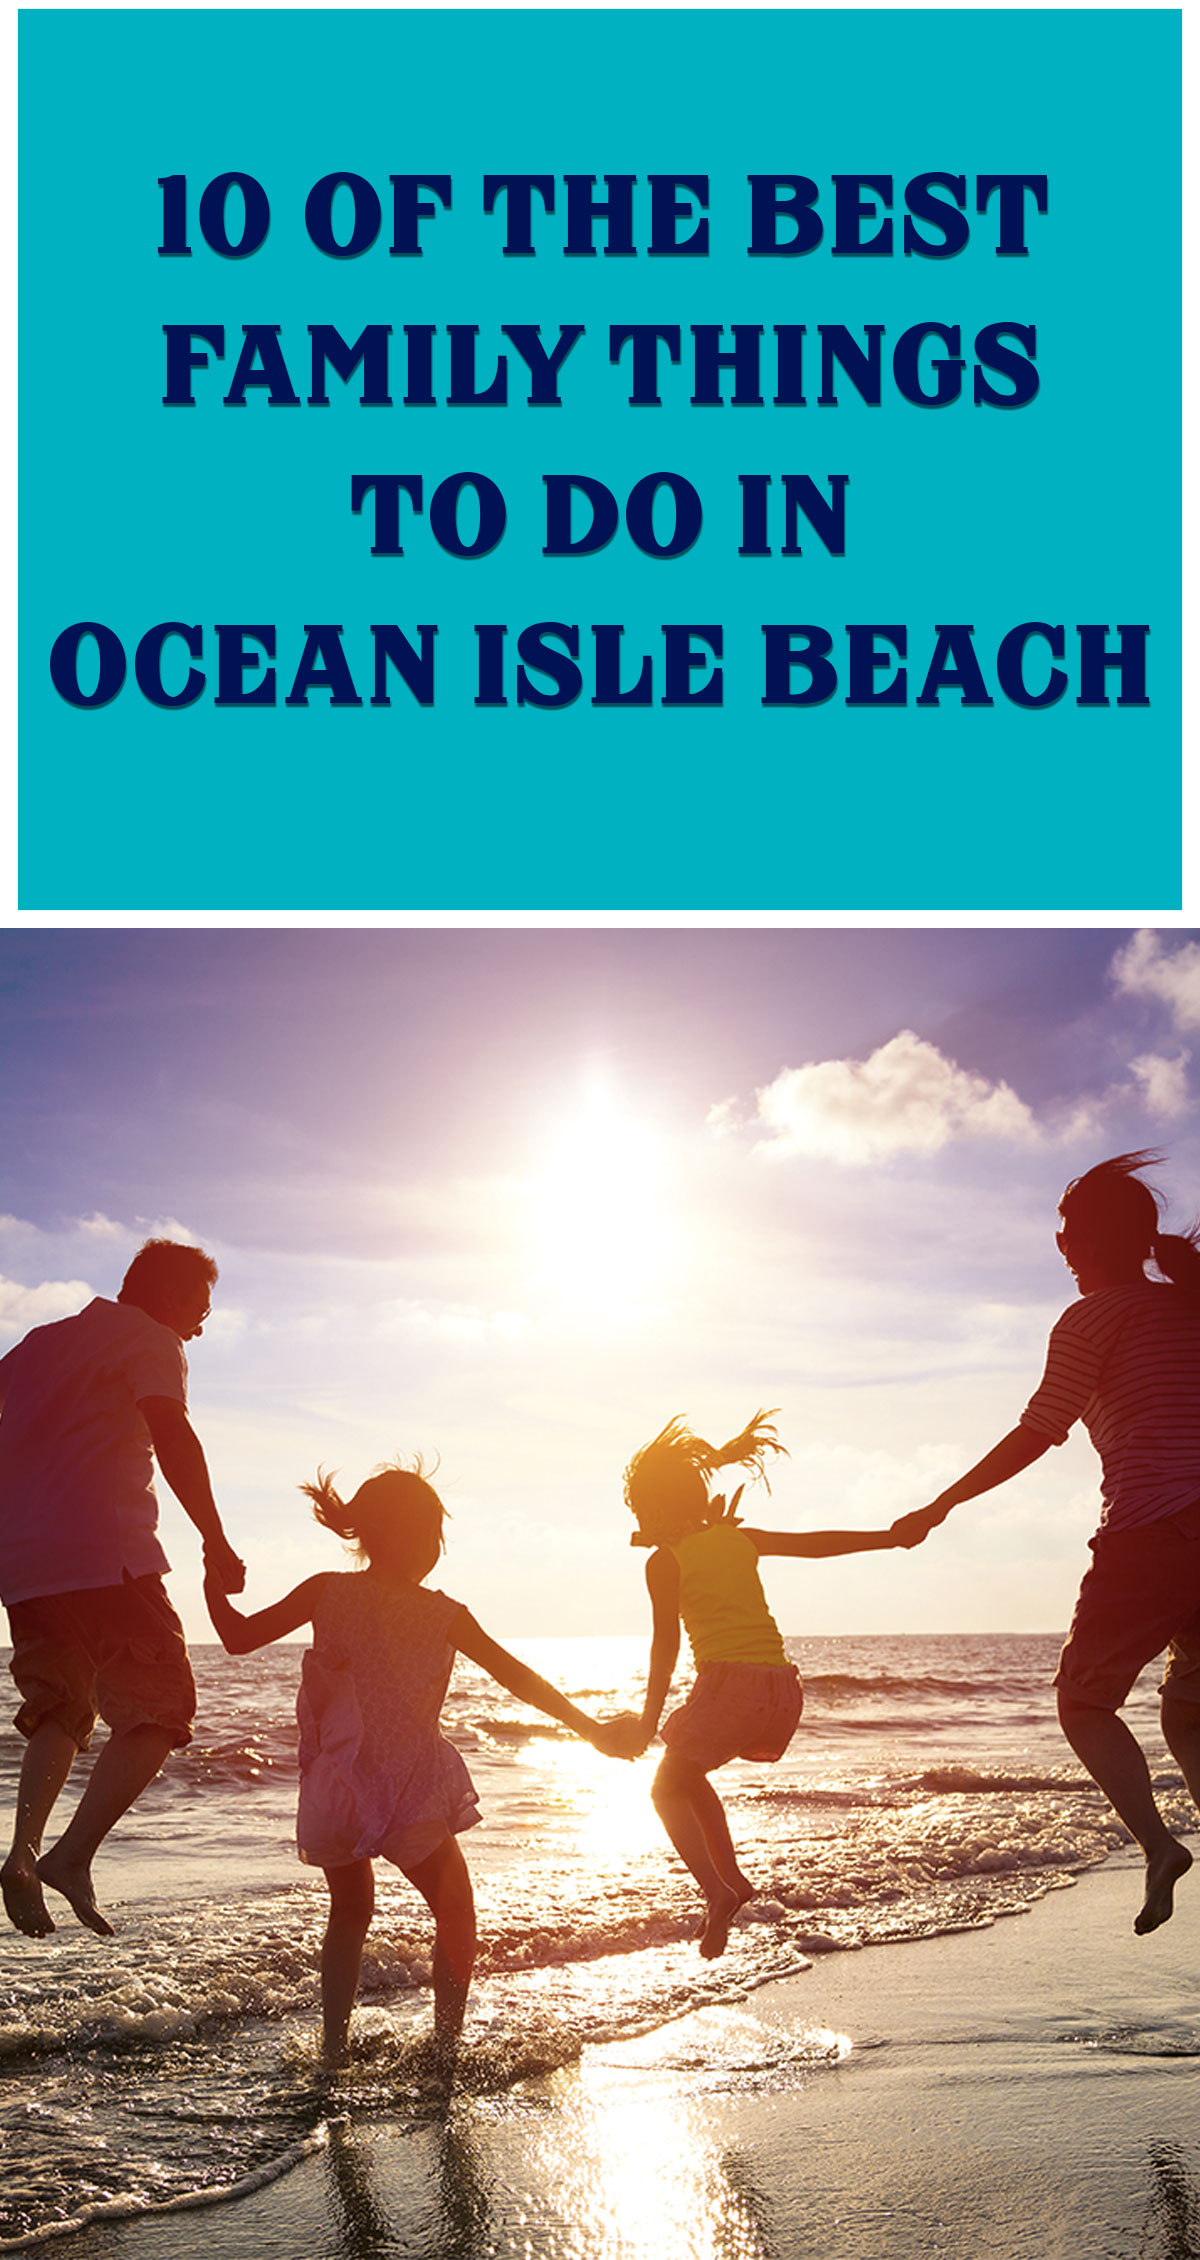 10 of the Best Family Things To Do in Ocean Isle Beach Pin